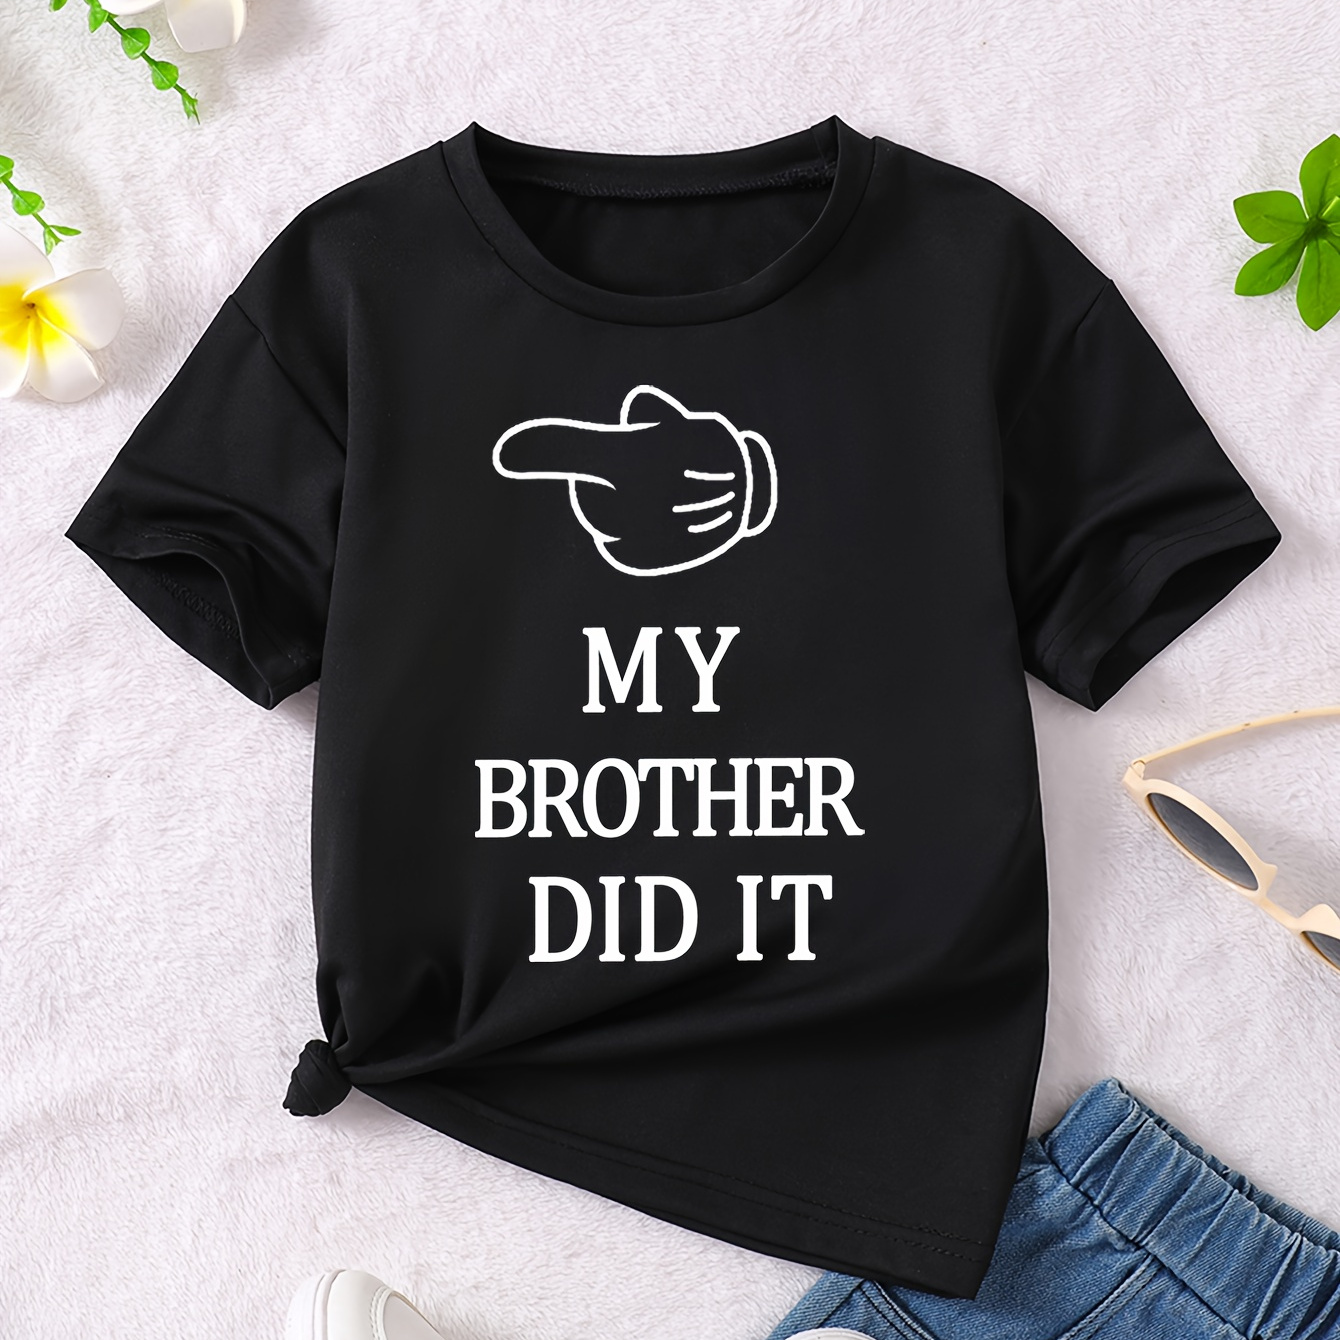 

My Brother Did It And Cartoon Hand Gesture Graphic Print, Girls' Casual Crew Neck Short Sleeve T-shirt, Comfy Top Clothes For Spring And Summer For Outdoor Activities